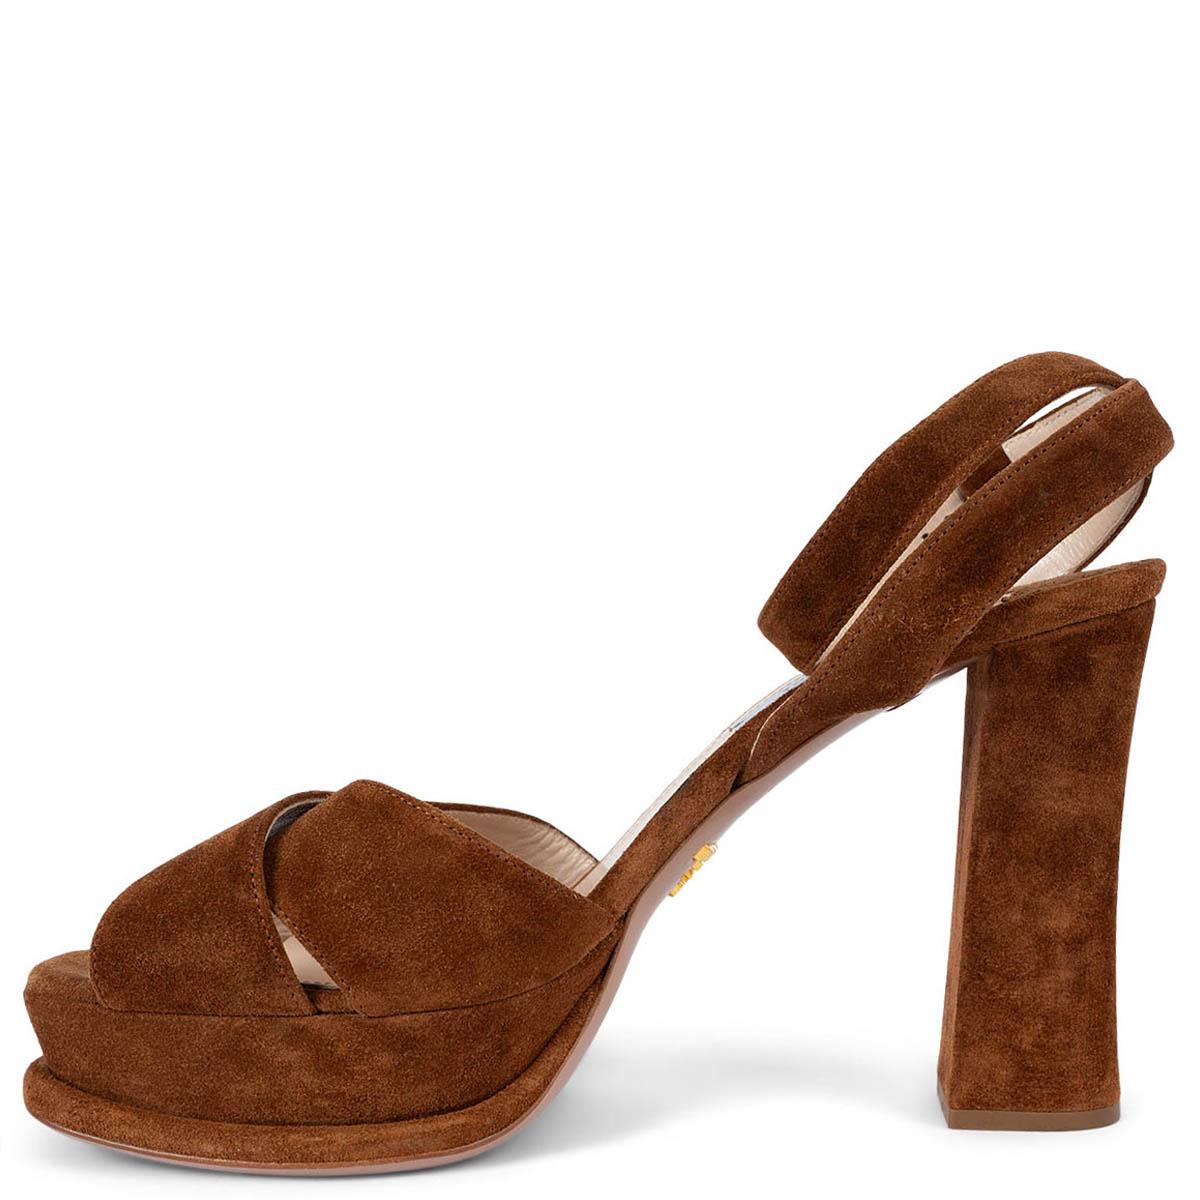 PRADA brown suede Platform Ankle Strap Sandals Shoes 40 In Excellent Condition For Sale In Zürich, CH